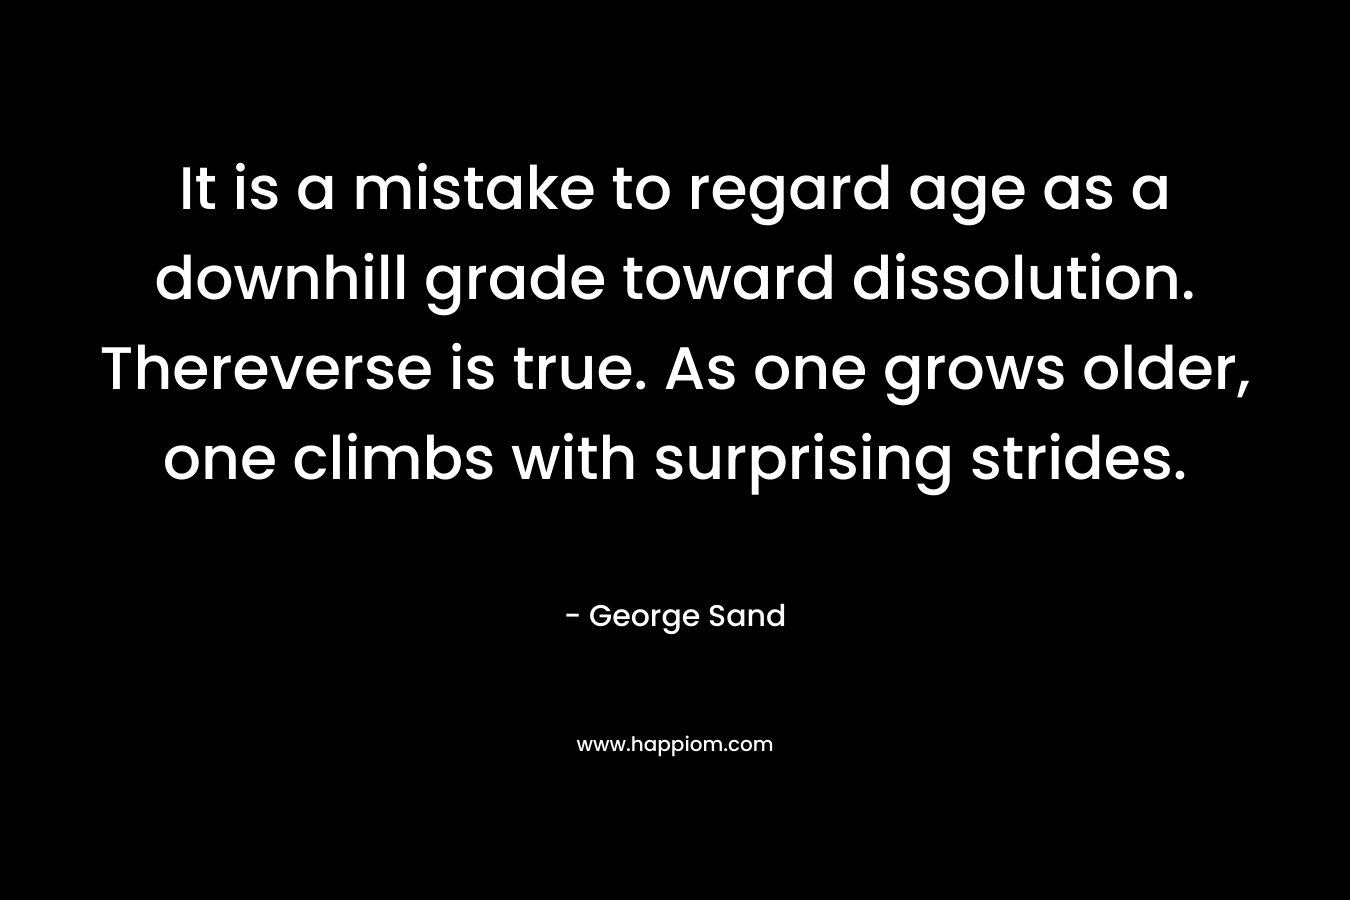 It is a mistake to regard age as a downhill grade toward dissolution. Thereverse is true. As one grows older, one climbs with surprising strides. – George Sand